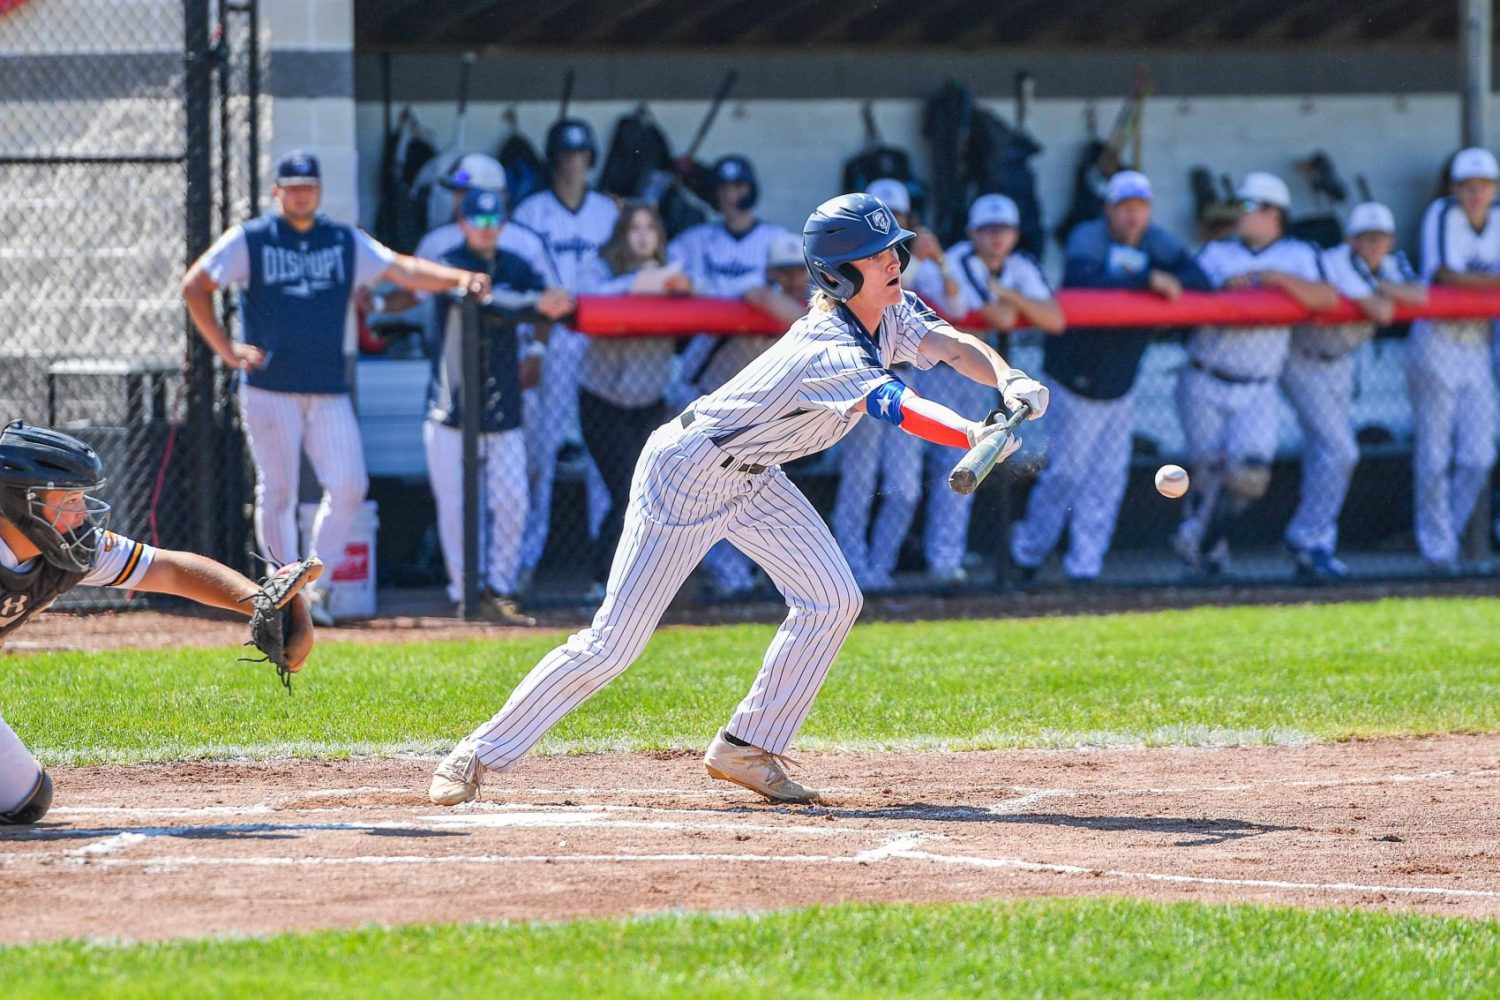 Fruitport advances to Division 2 regional championship baseball game after trouncing Tri-County 17-1